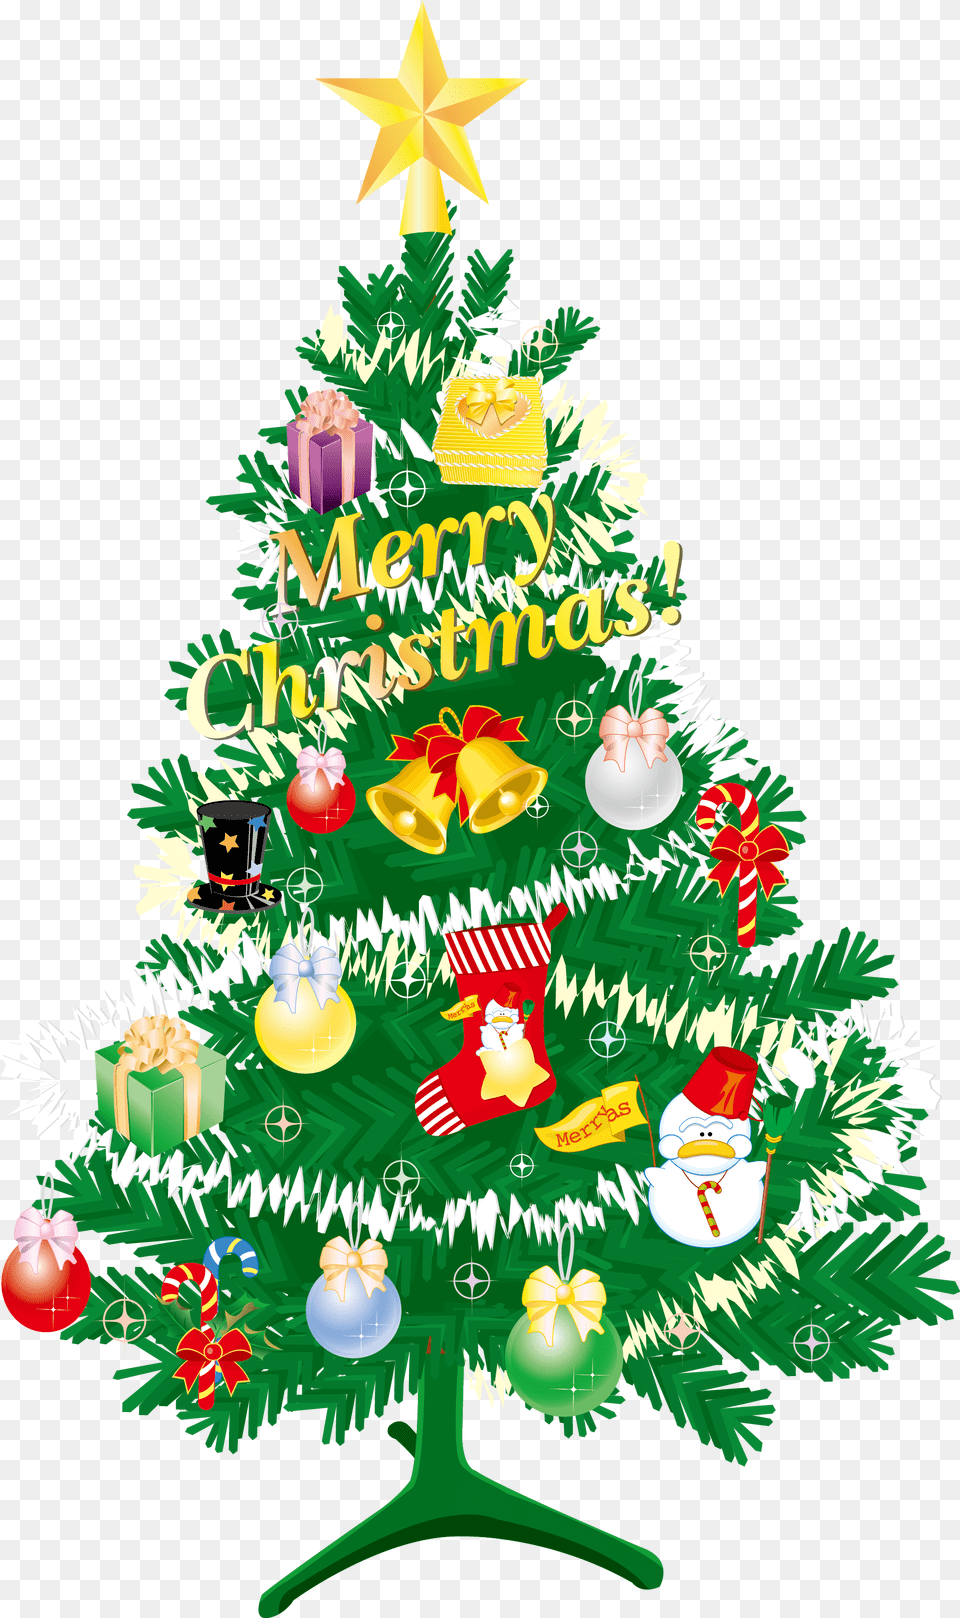 Christmas Tree Vector Animated Decorated Christmas Tree, Christmas Decorations, Festival, Plant, Christmas Tree Png